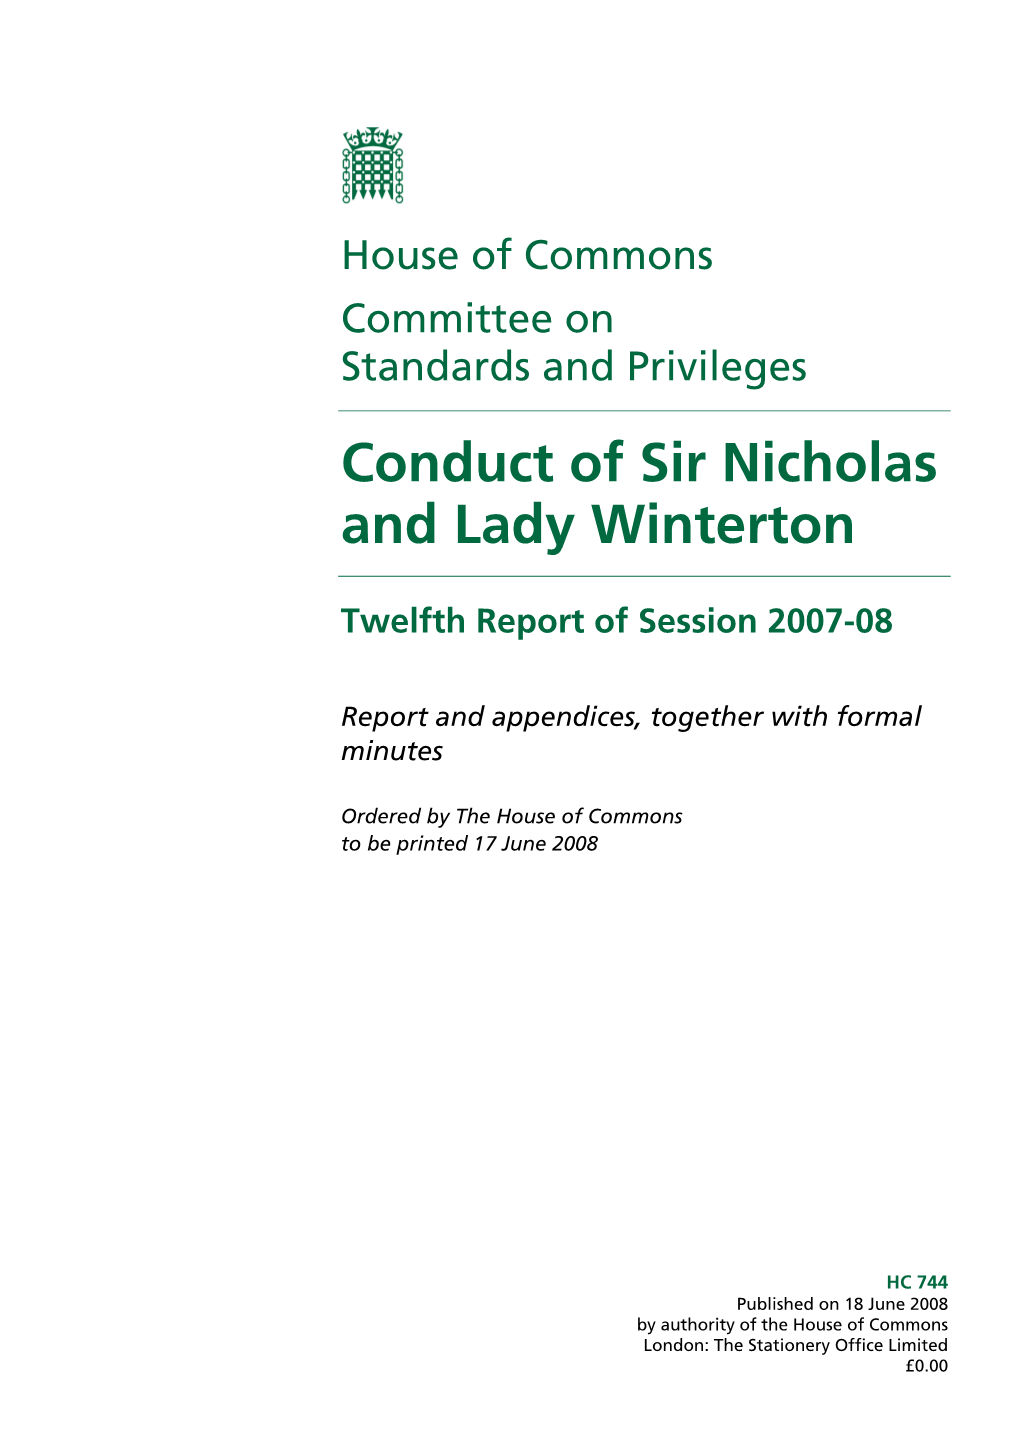 Conduct of Sir Nicholas and Lady Winterton